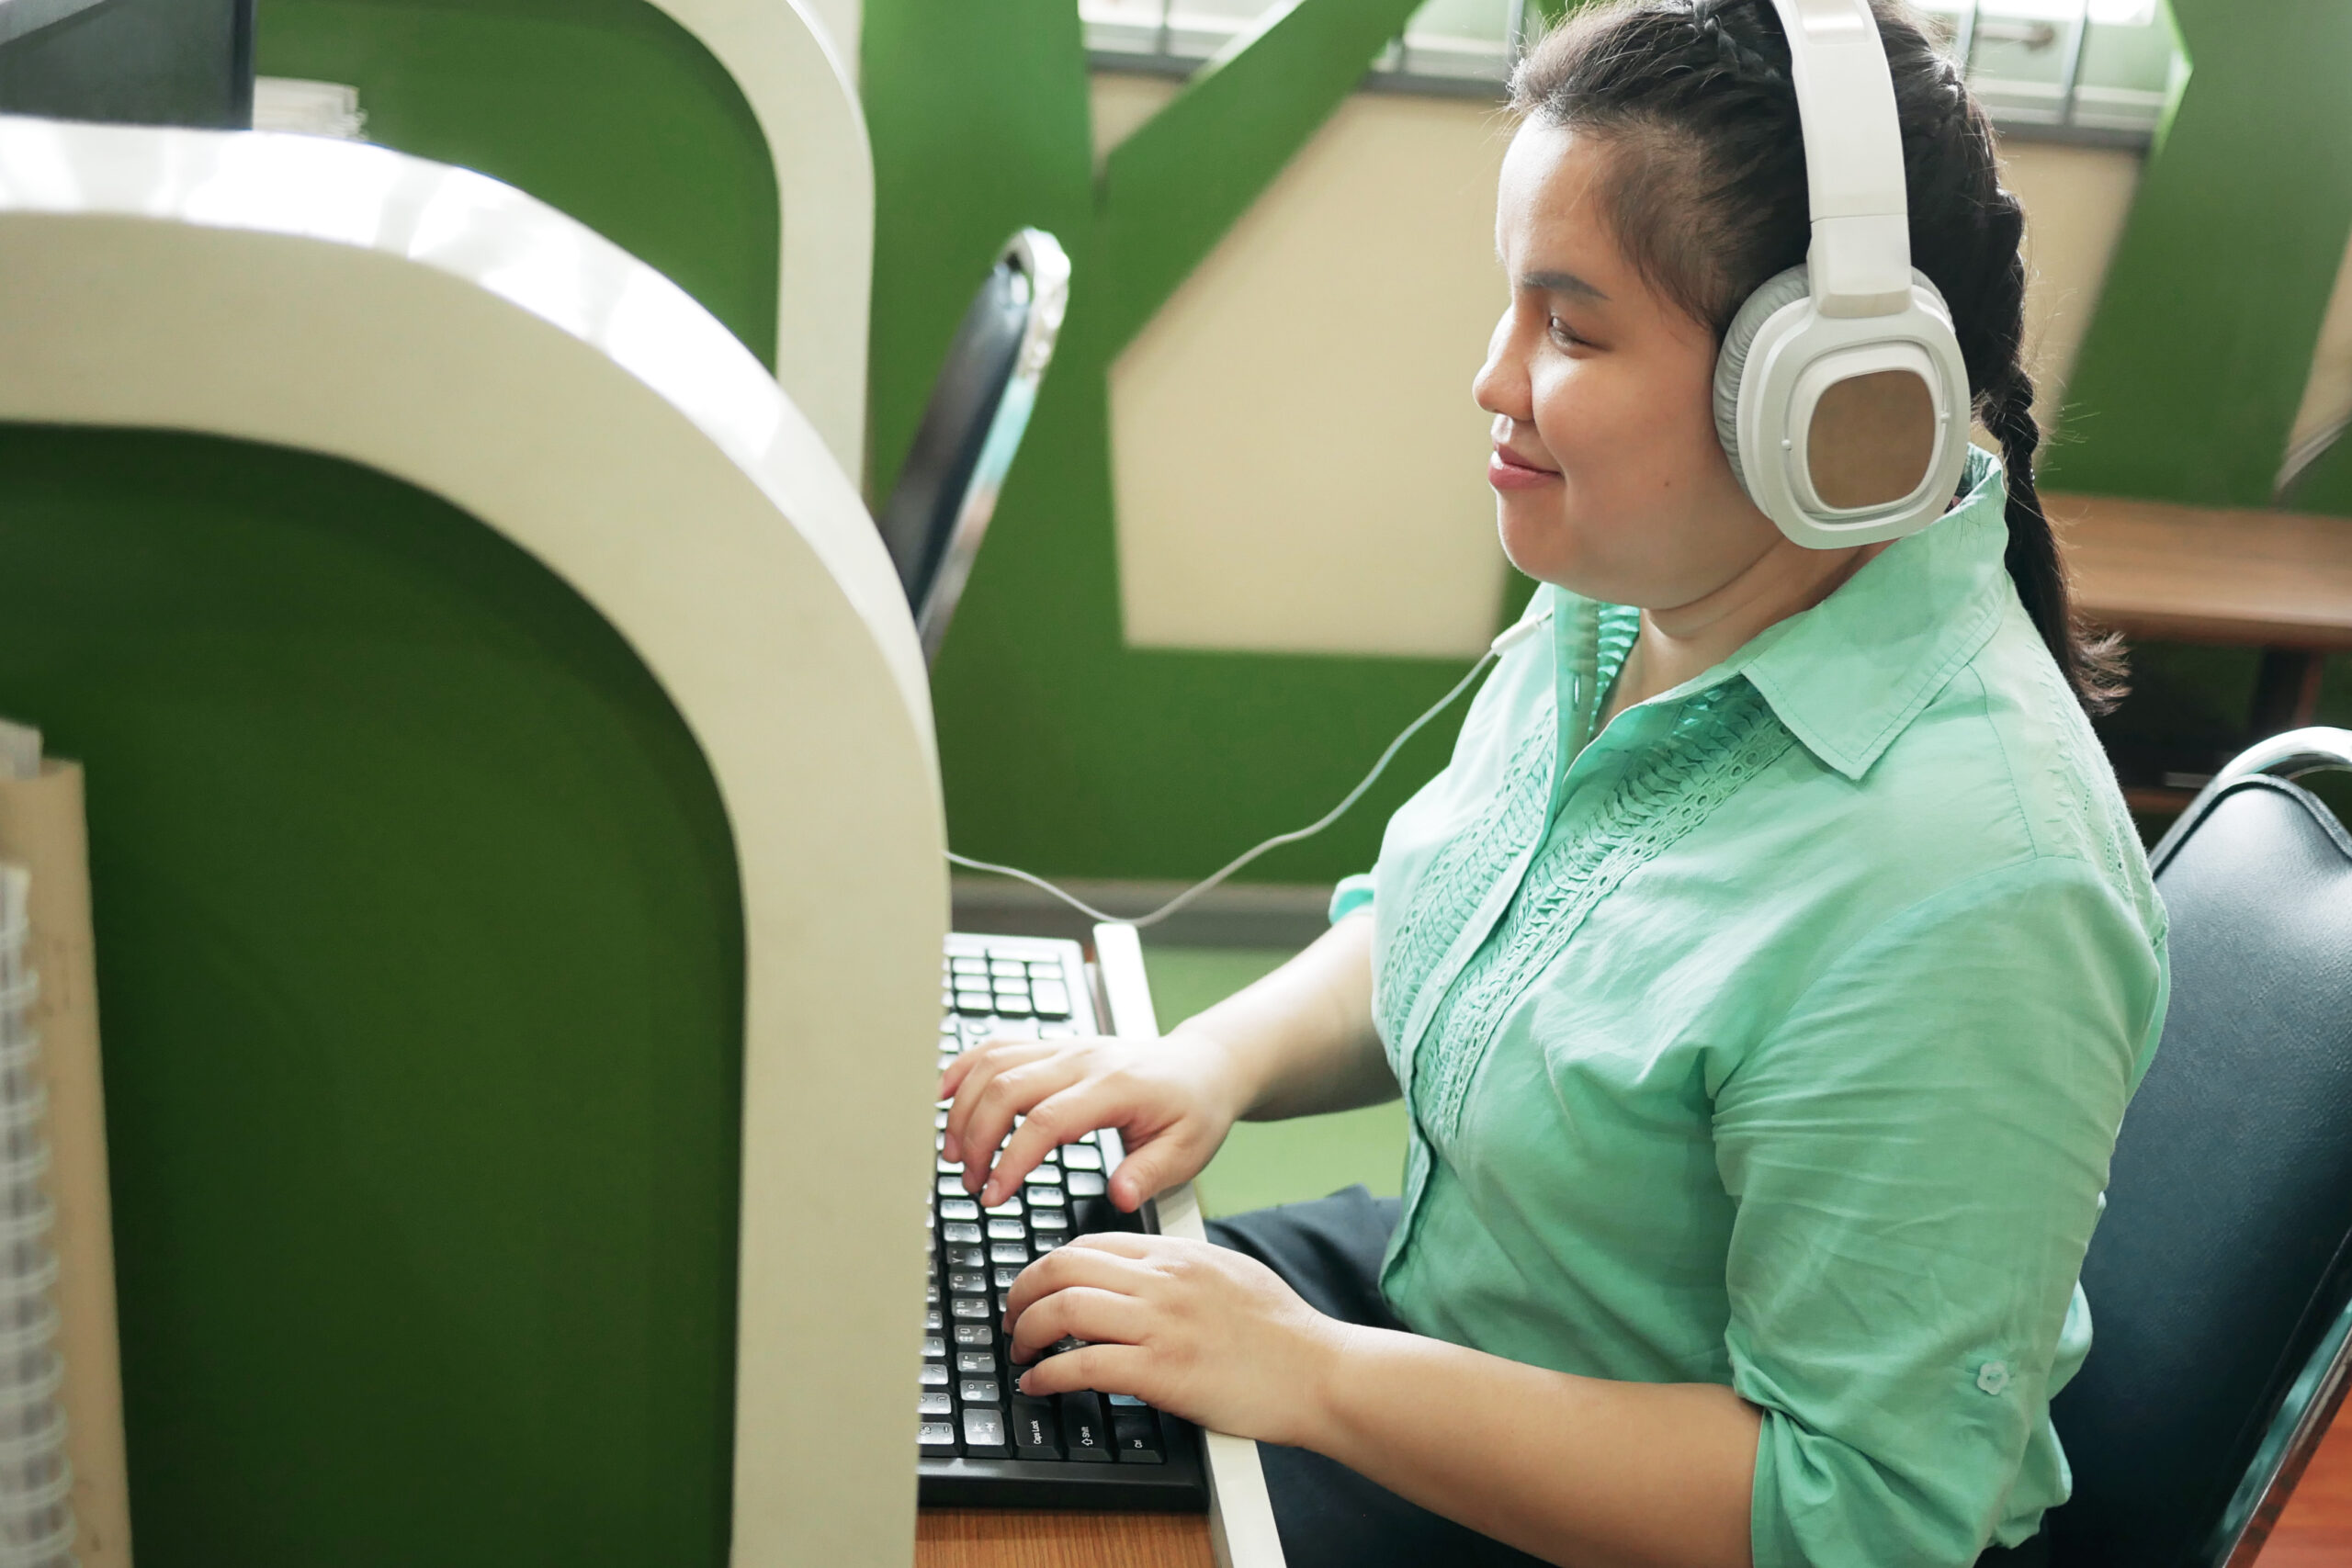 Blind woman sitting at computer cubicle, using computer, with headphones on.